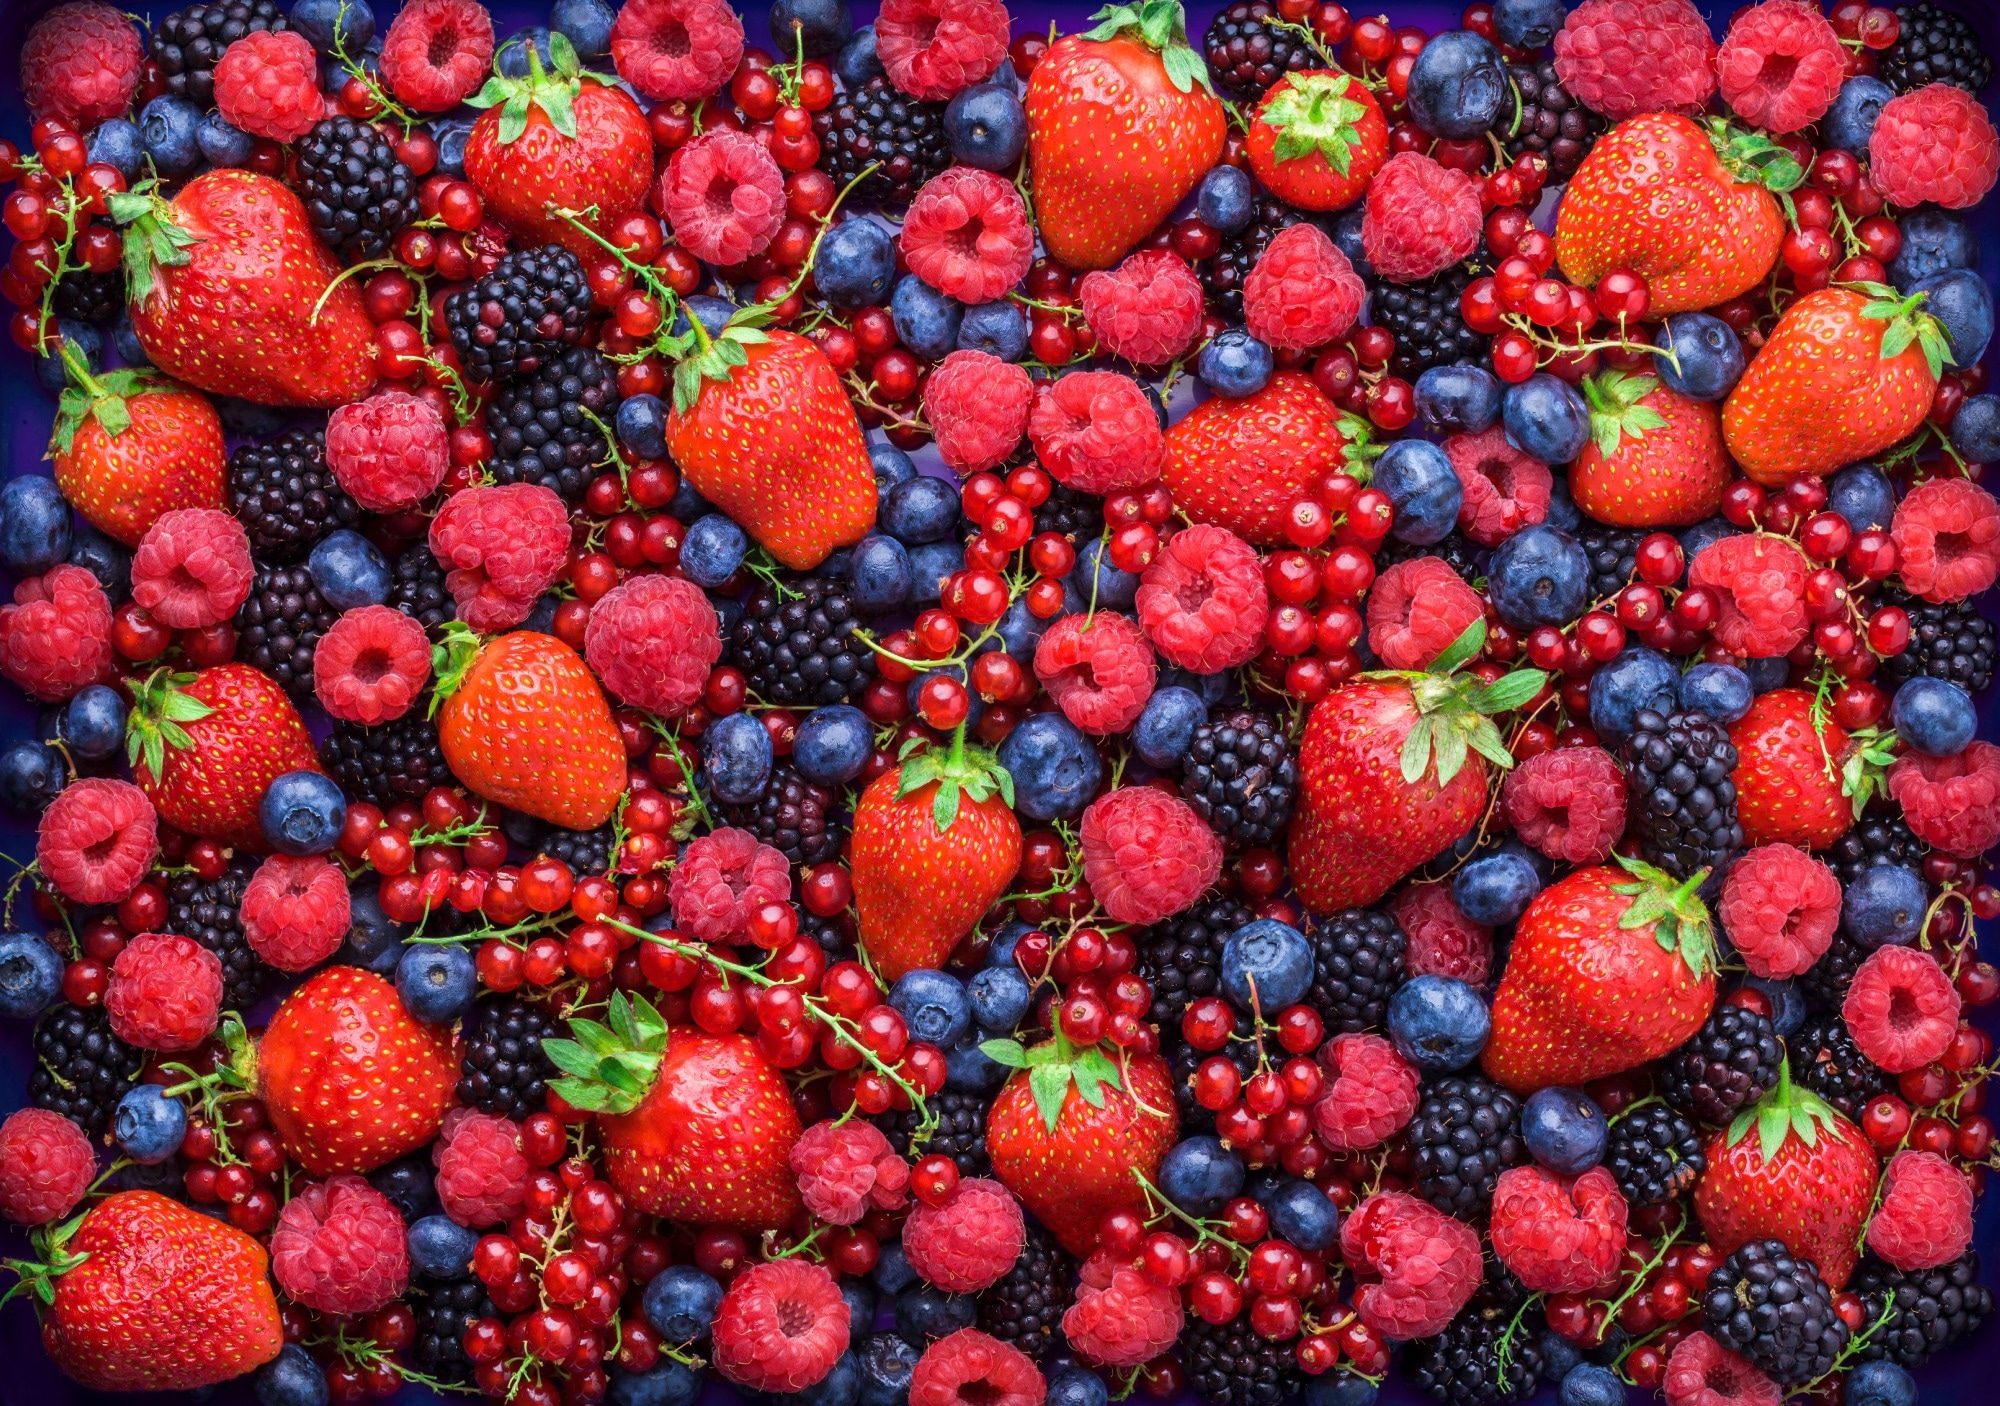 Study: Berry consumption in relation to allostatic load among US adults: National Health and Nutrition Examination Survey, 2003–2010.  Image credit: Bojsha/Shutterstock.com